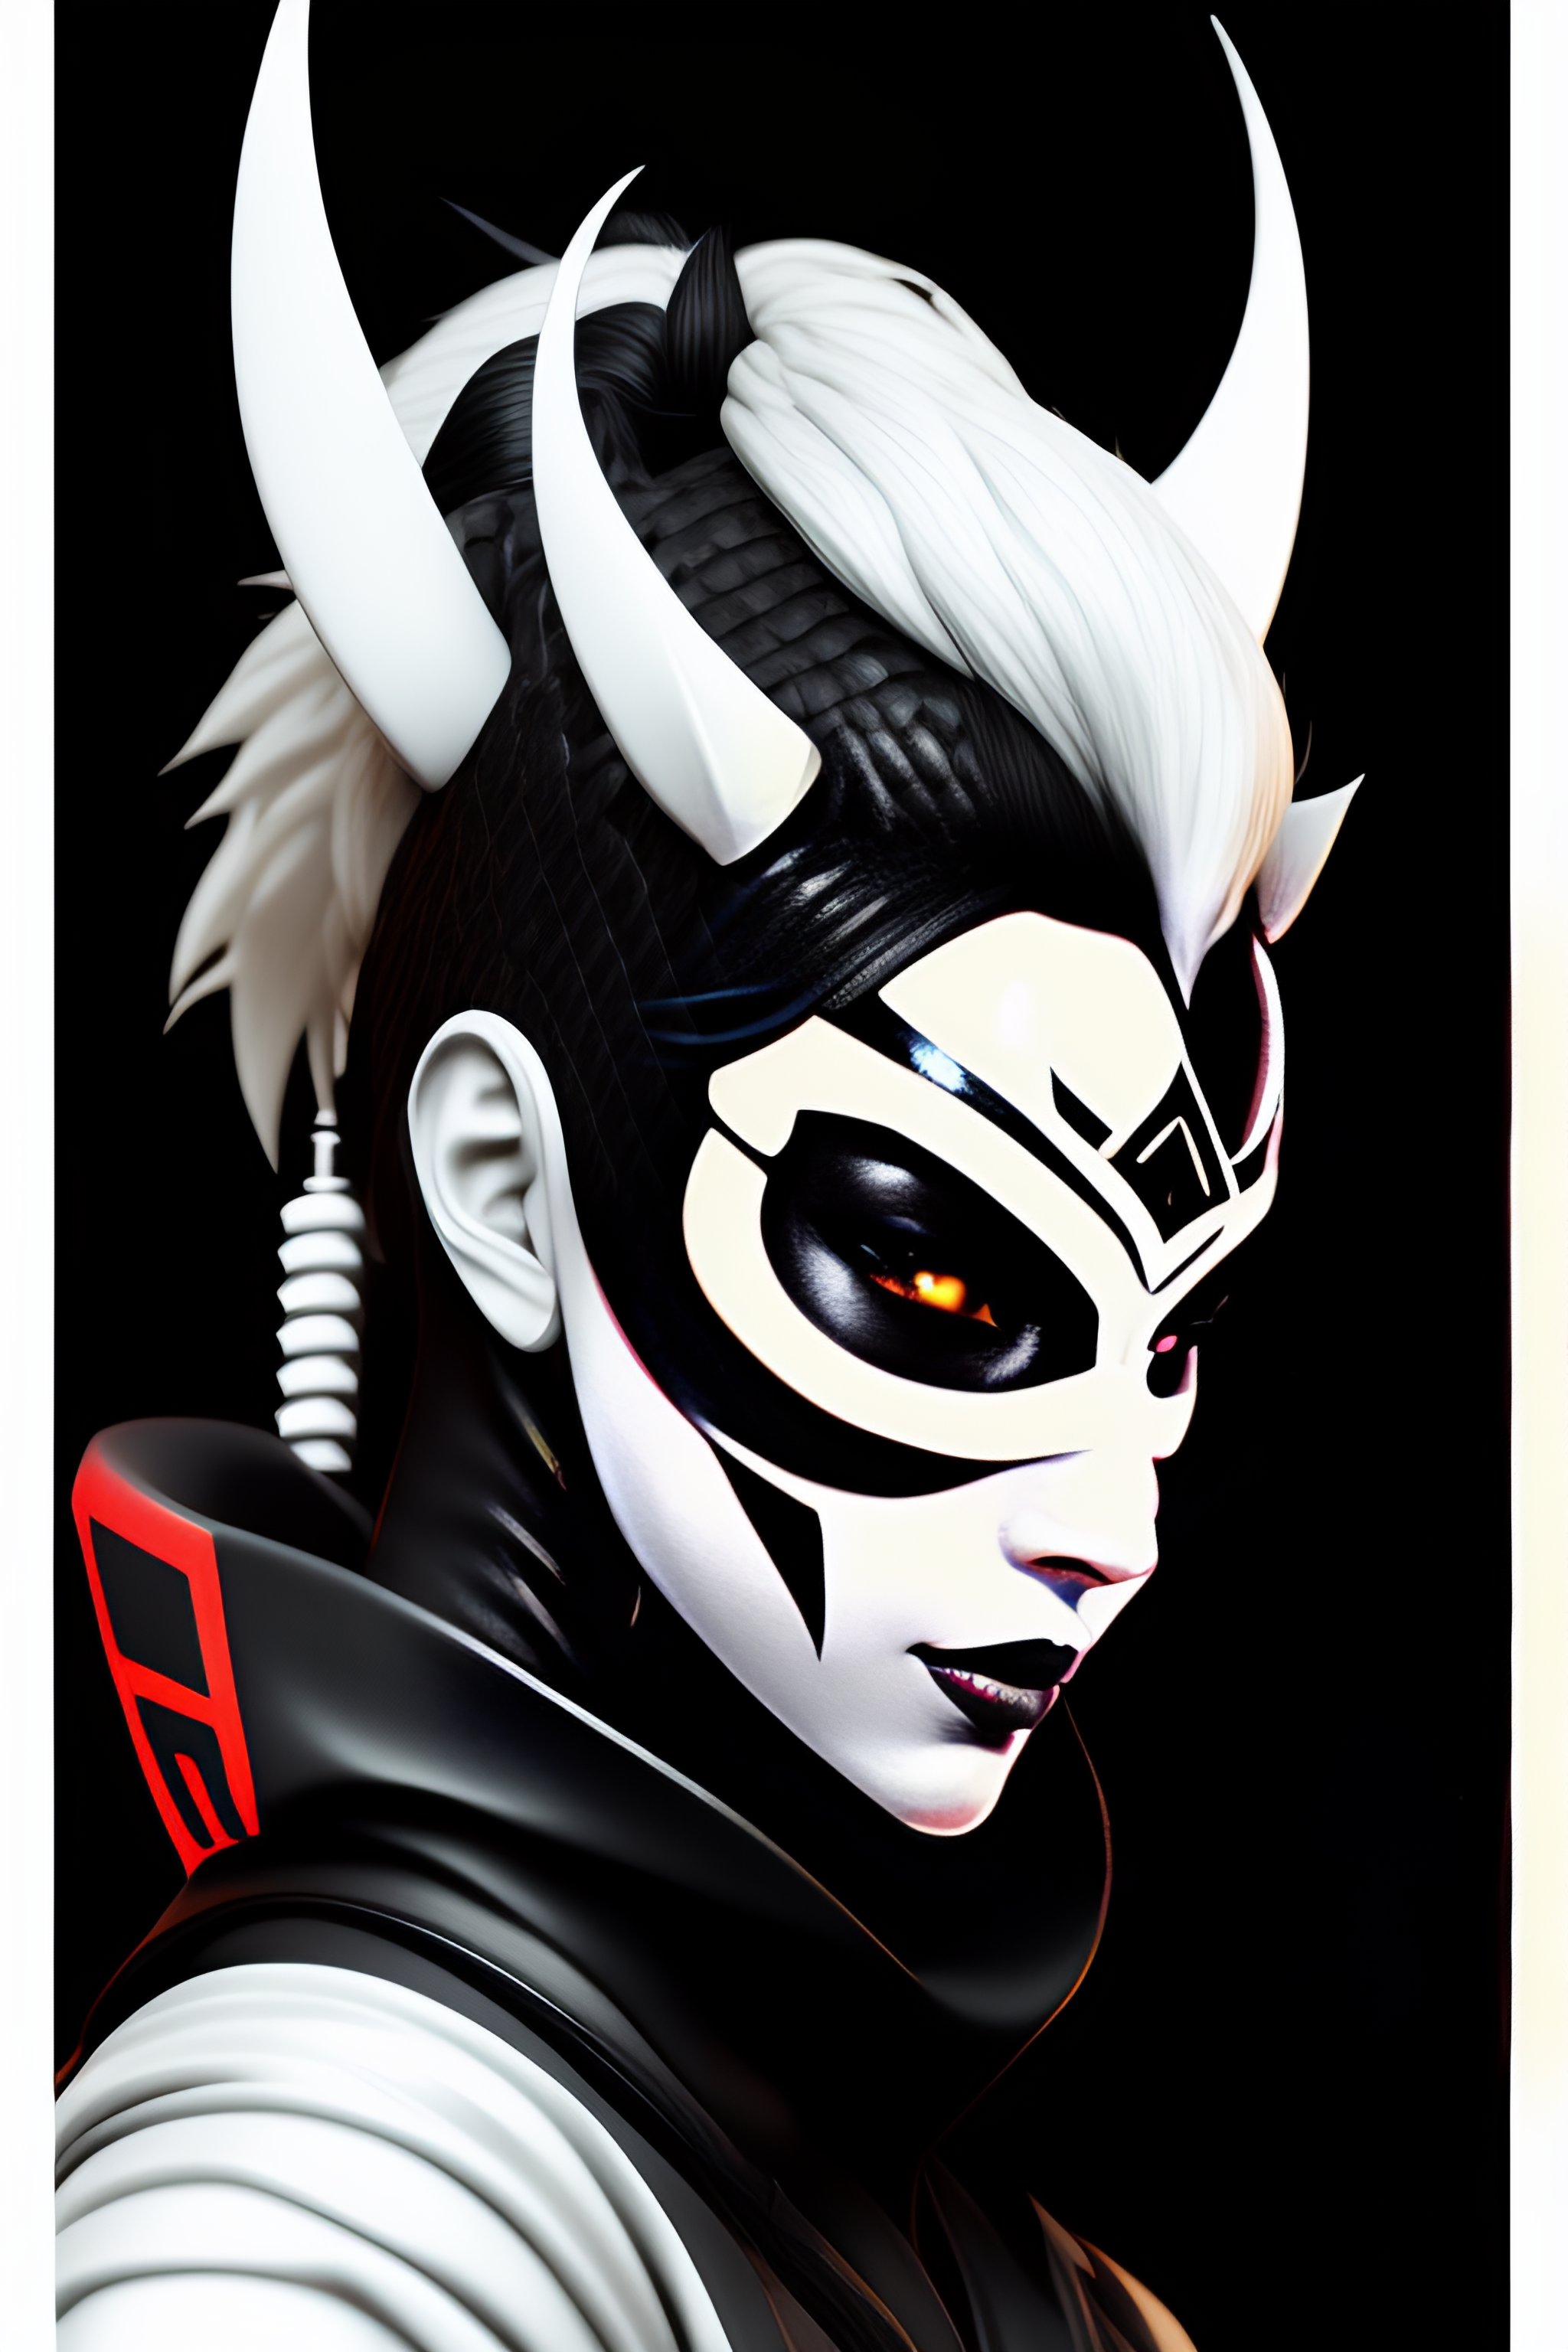 Lexica Only Oni Mask Cyberpunk White And Black 2d 3036